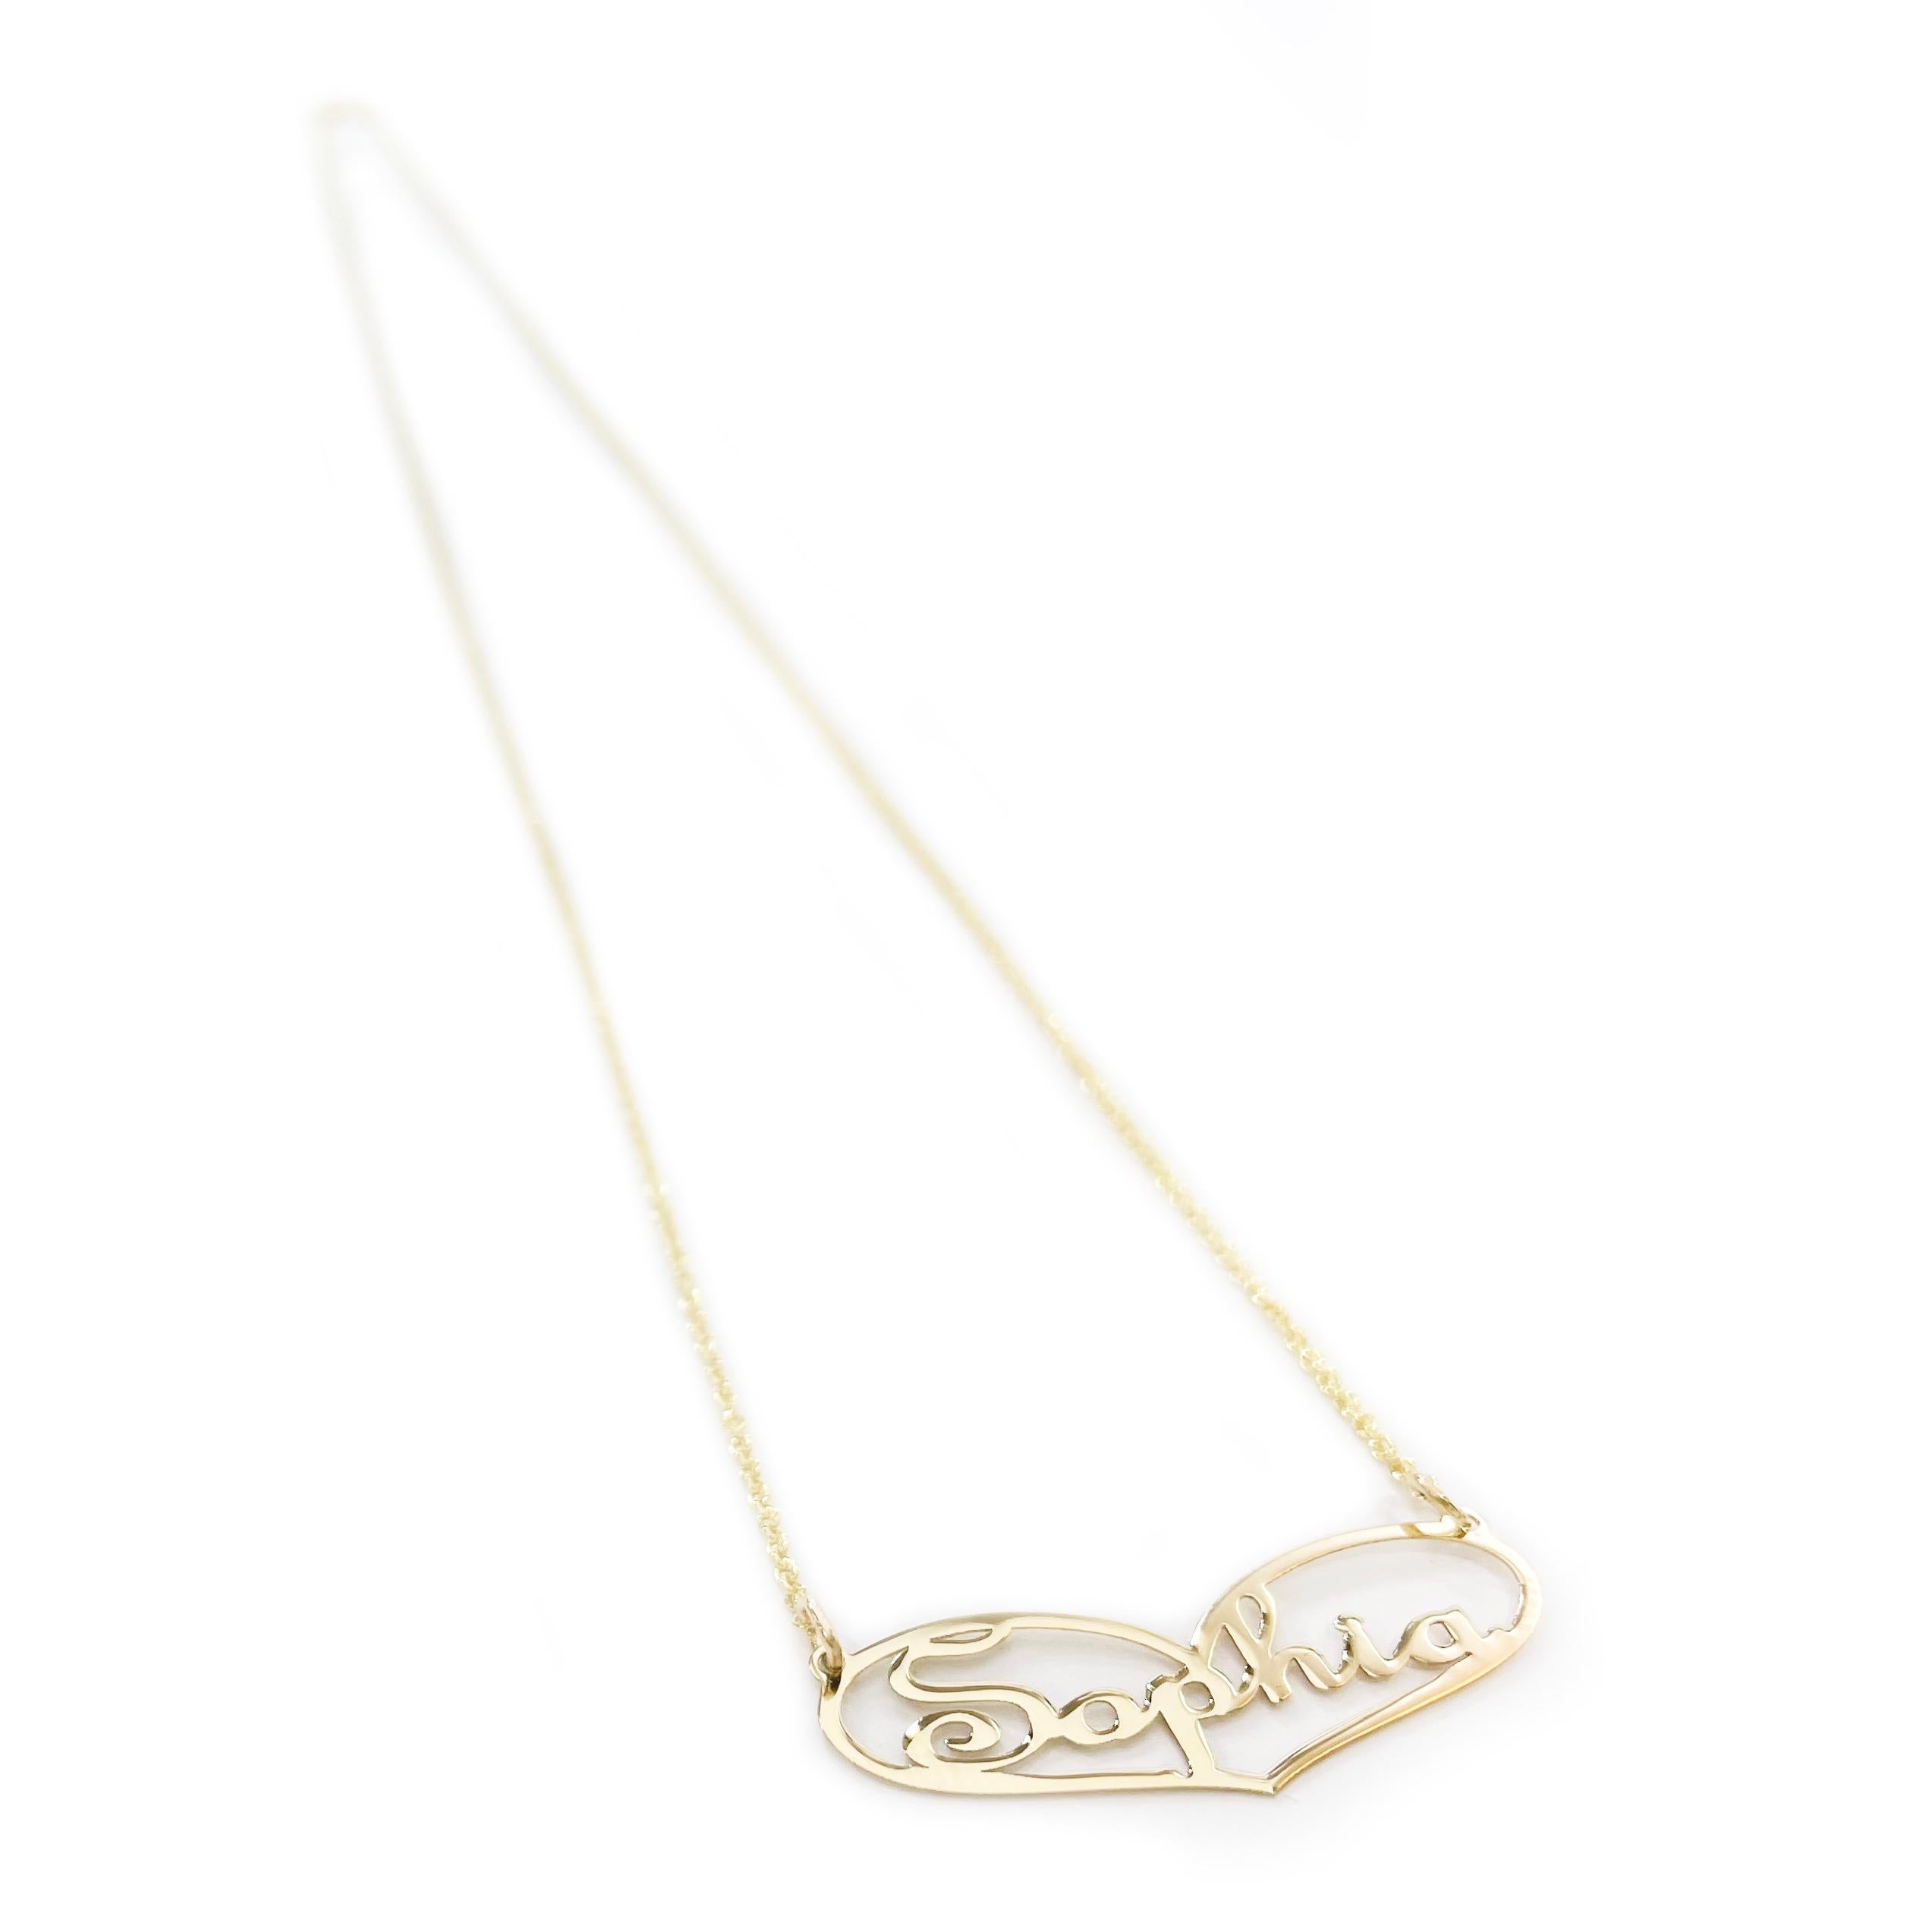 10 Karat Yellow Gold Sophia Name Pendant Necklace. This necklace features an elongated heart shape pendant with the name Sophia inside the heart in a cursive font. The chain is 18